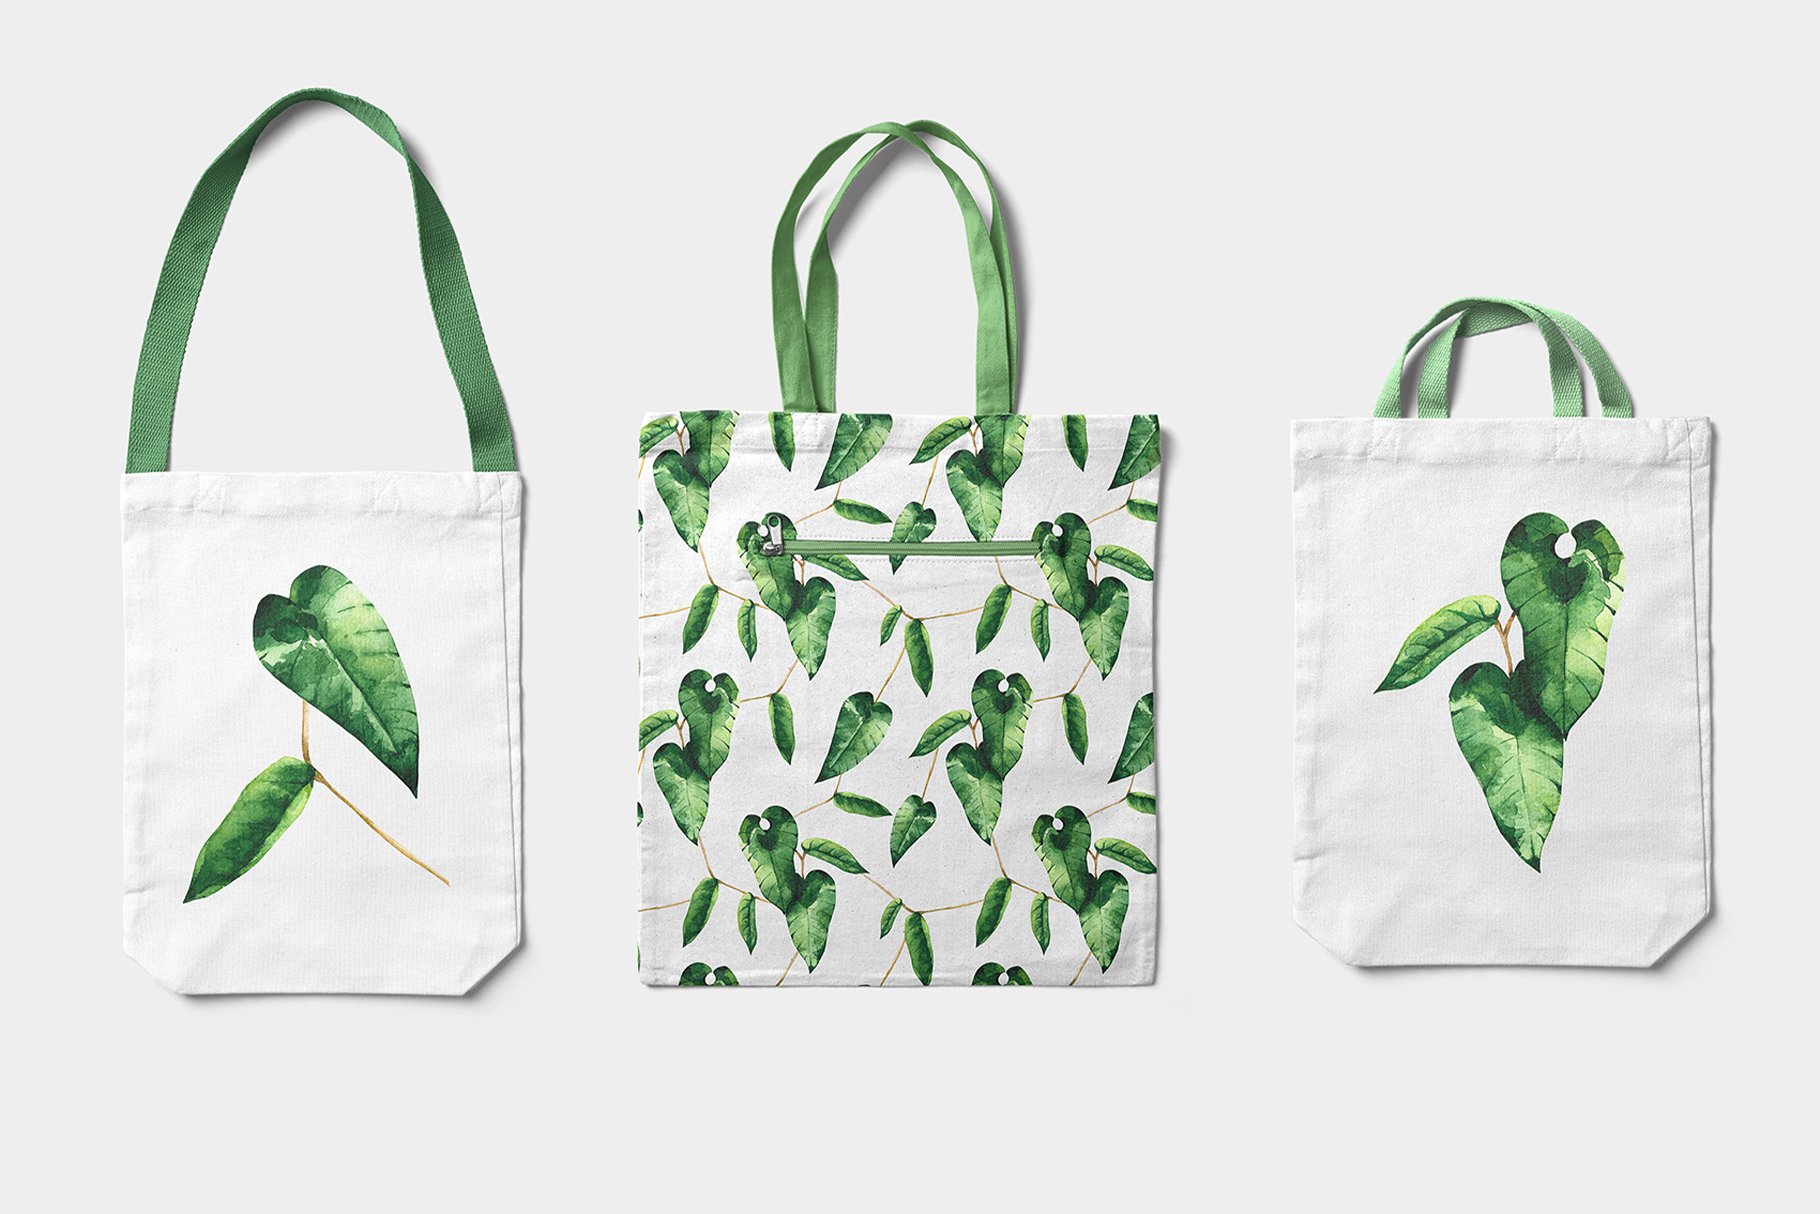 Some options of eco bag with ivy leaves.